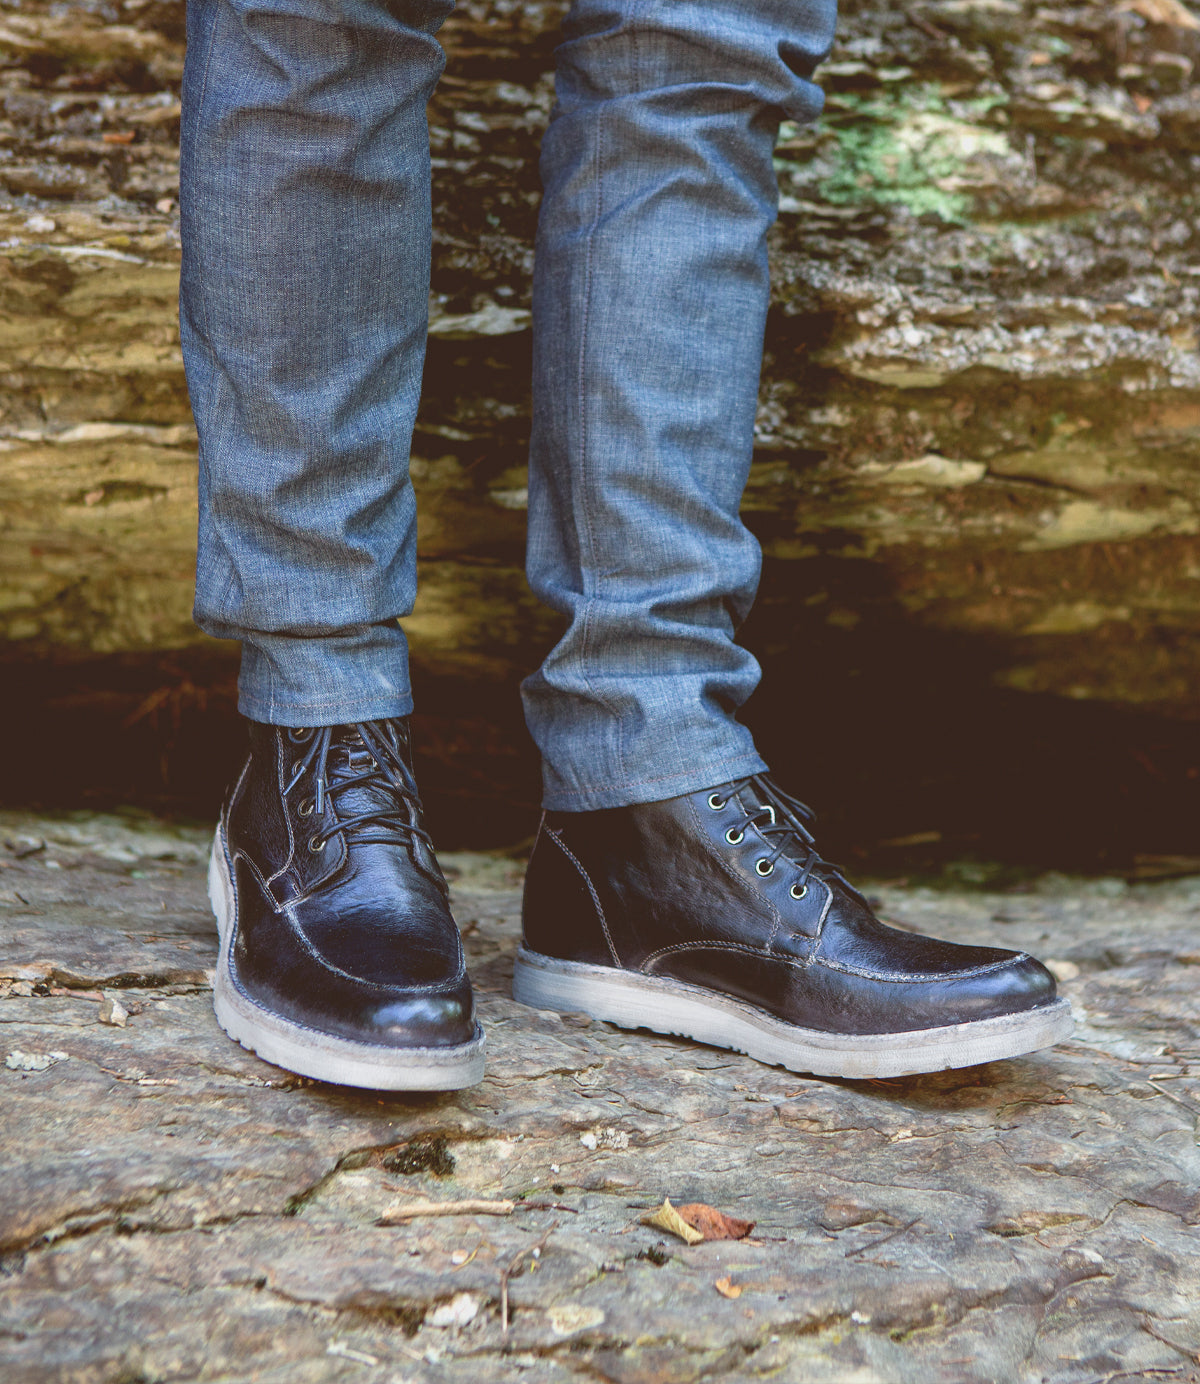 A person wearing dark jeans and a Bed Stu Lincoln Black Lux Boot standing on a rocky surface.